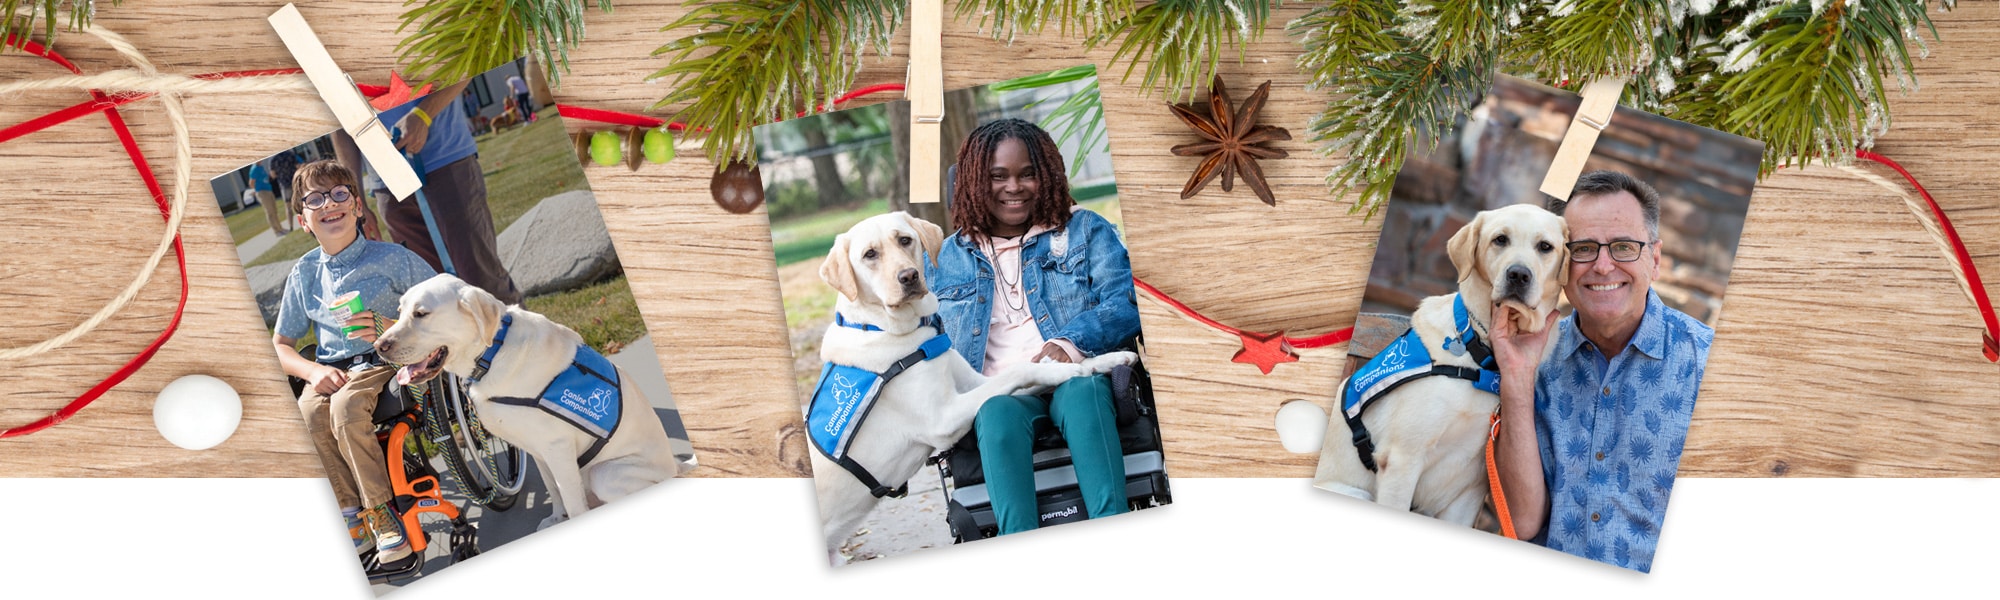 three images of service dog teams pinned to string with wood and evergreen branches behind them